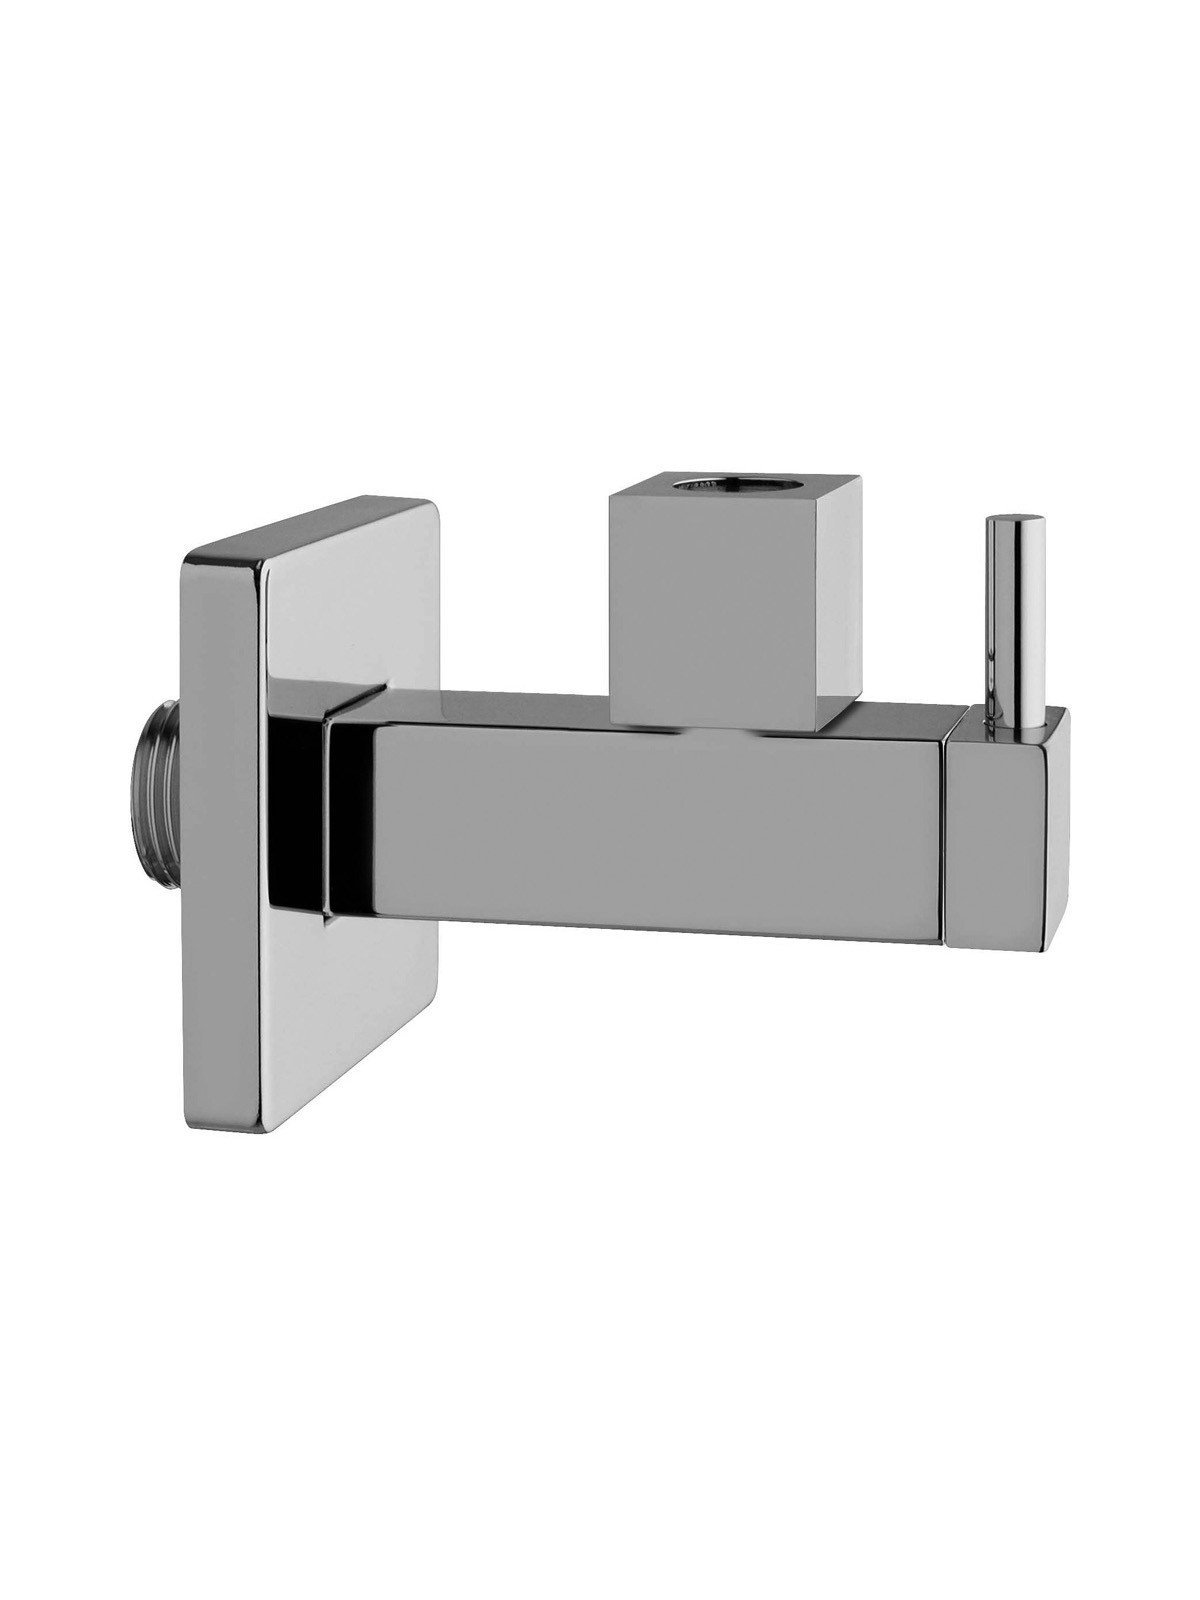 Square shaped under basin stop cock with filter